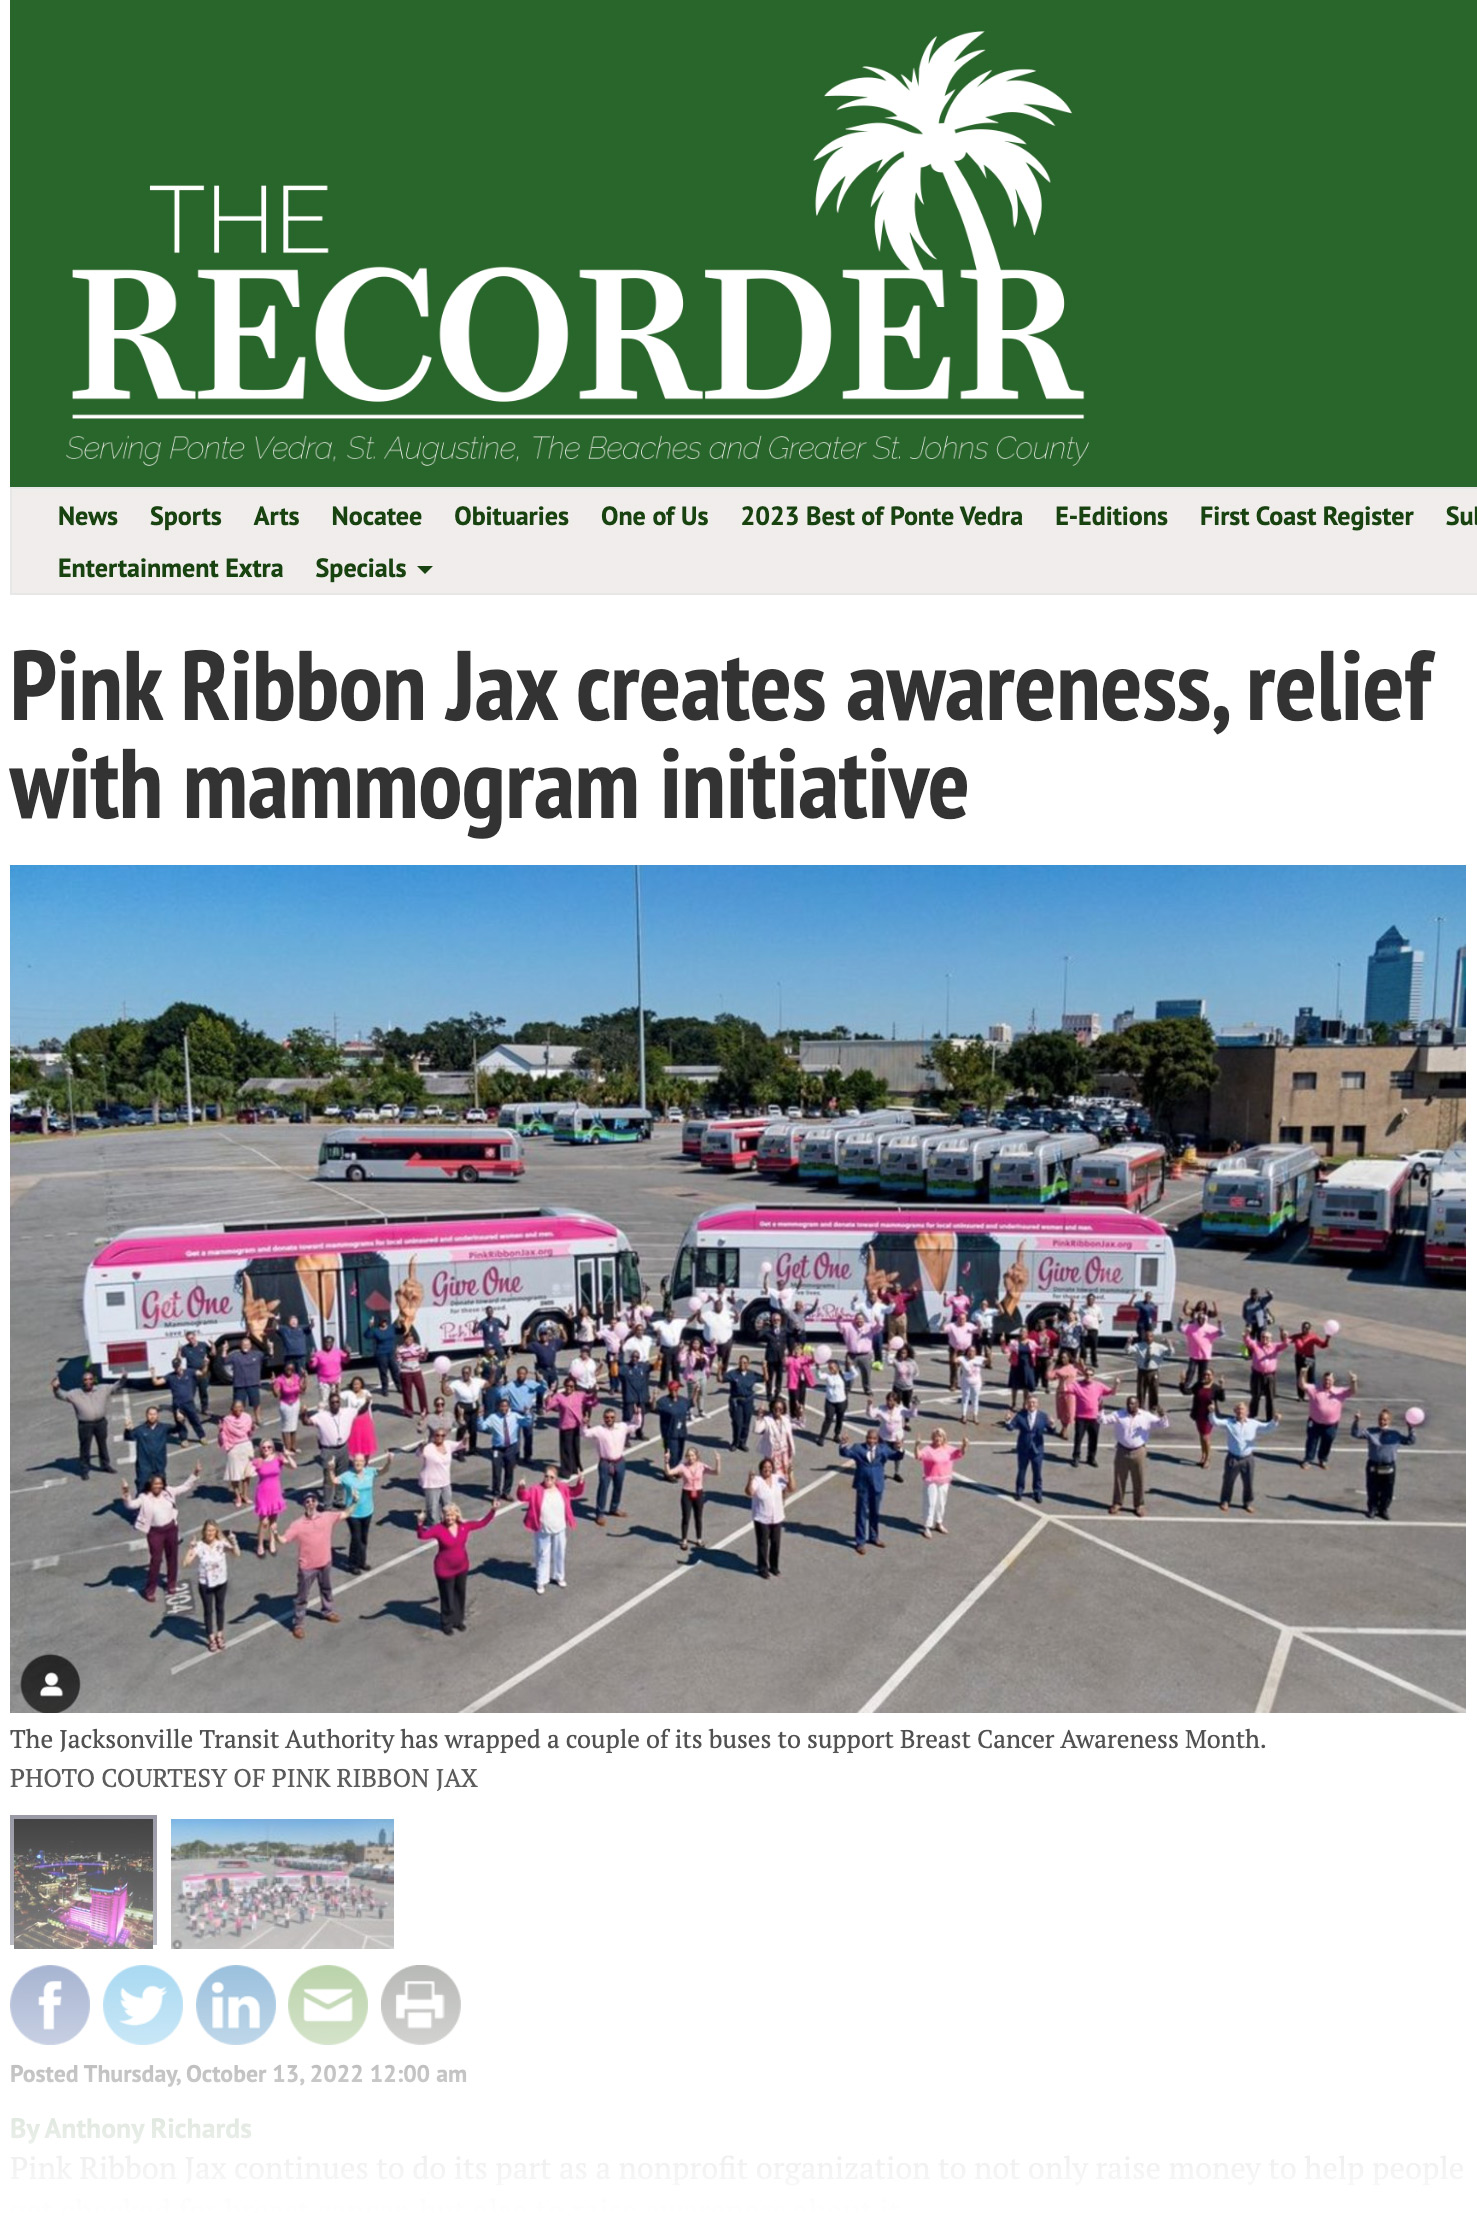 A news story about the efforts of a local non-profit, Pink Ribbon Jax, to raise money and awareness about the importance of mammograms.